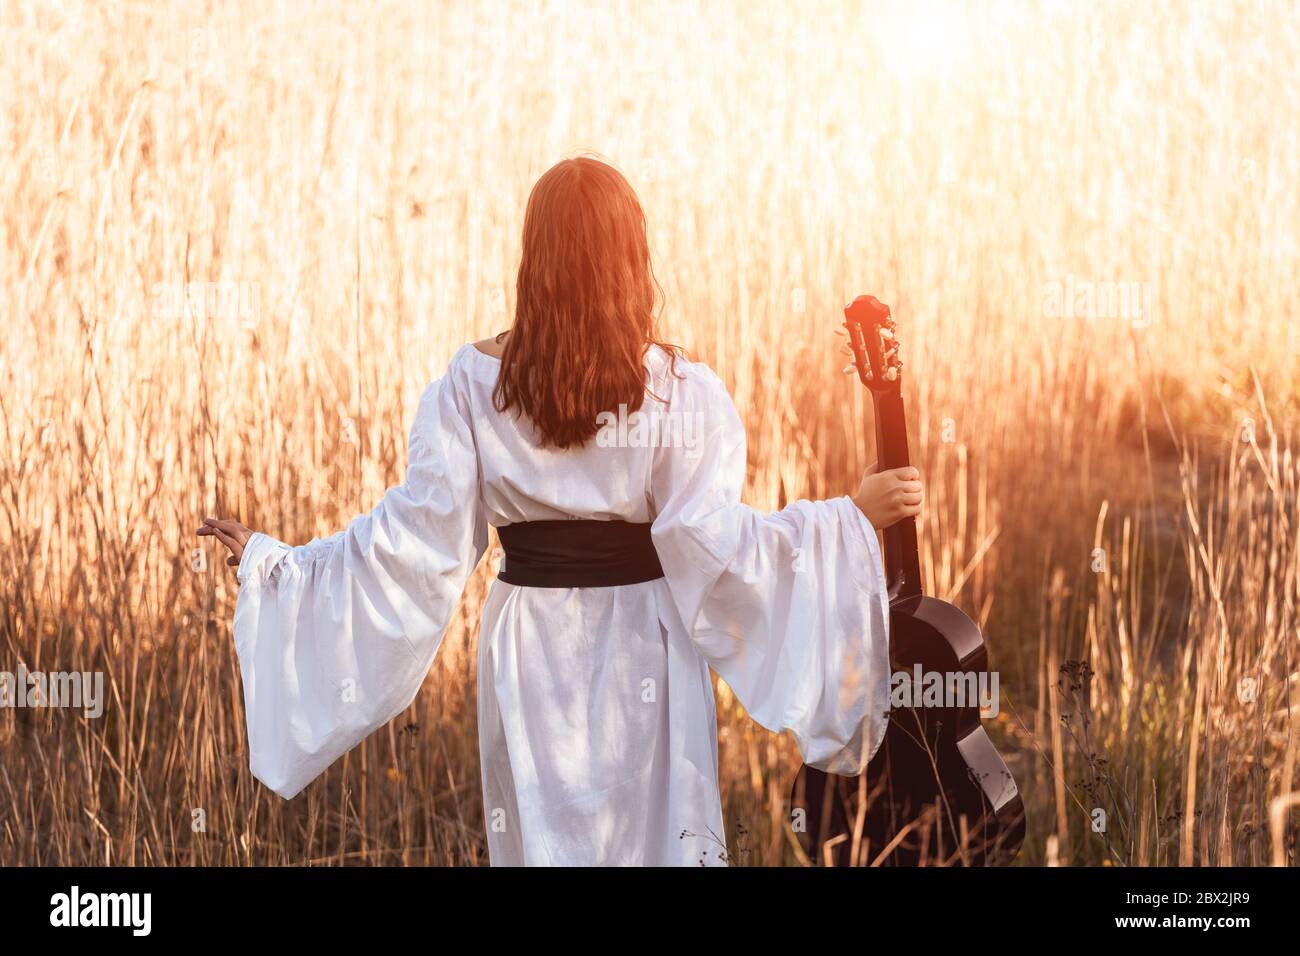 Back view of slender young woman with red hair in a white medieval dress and belt holding acoustic guitar and walking through the sunset light field. Stock Photo